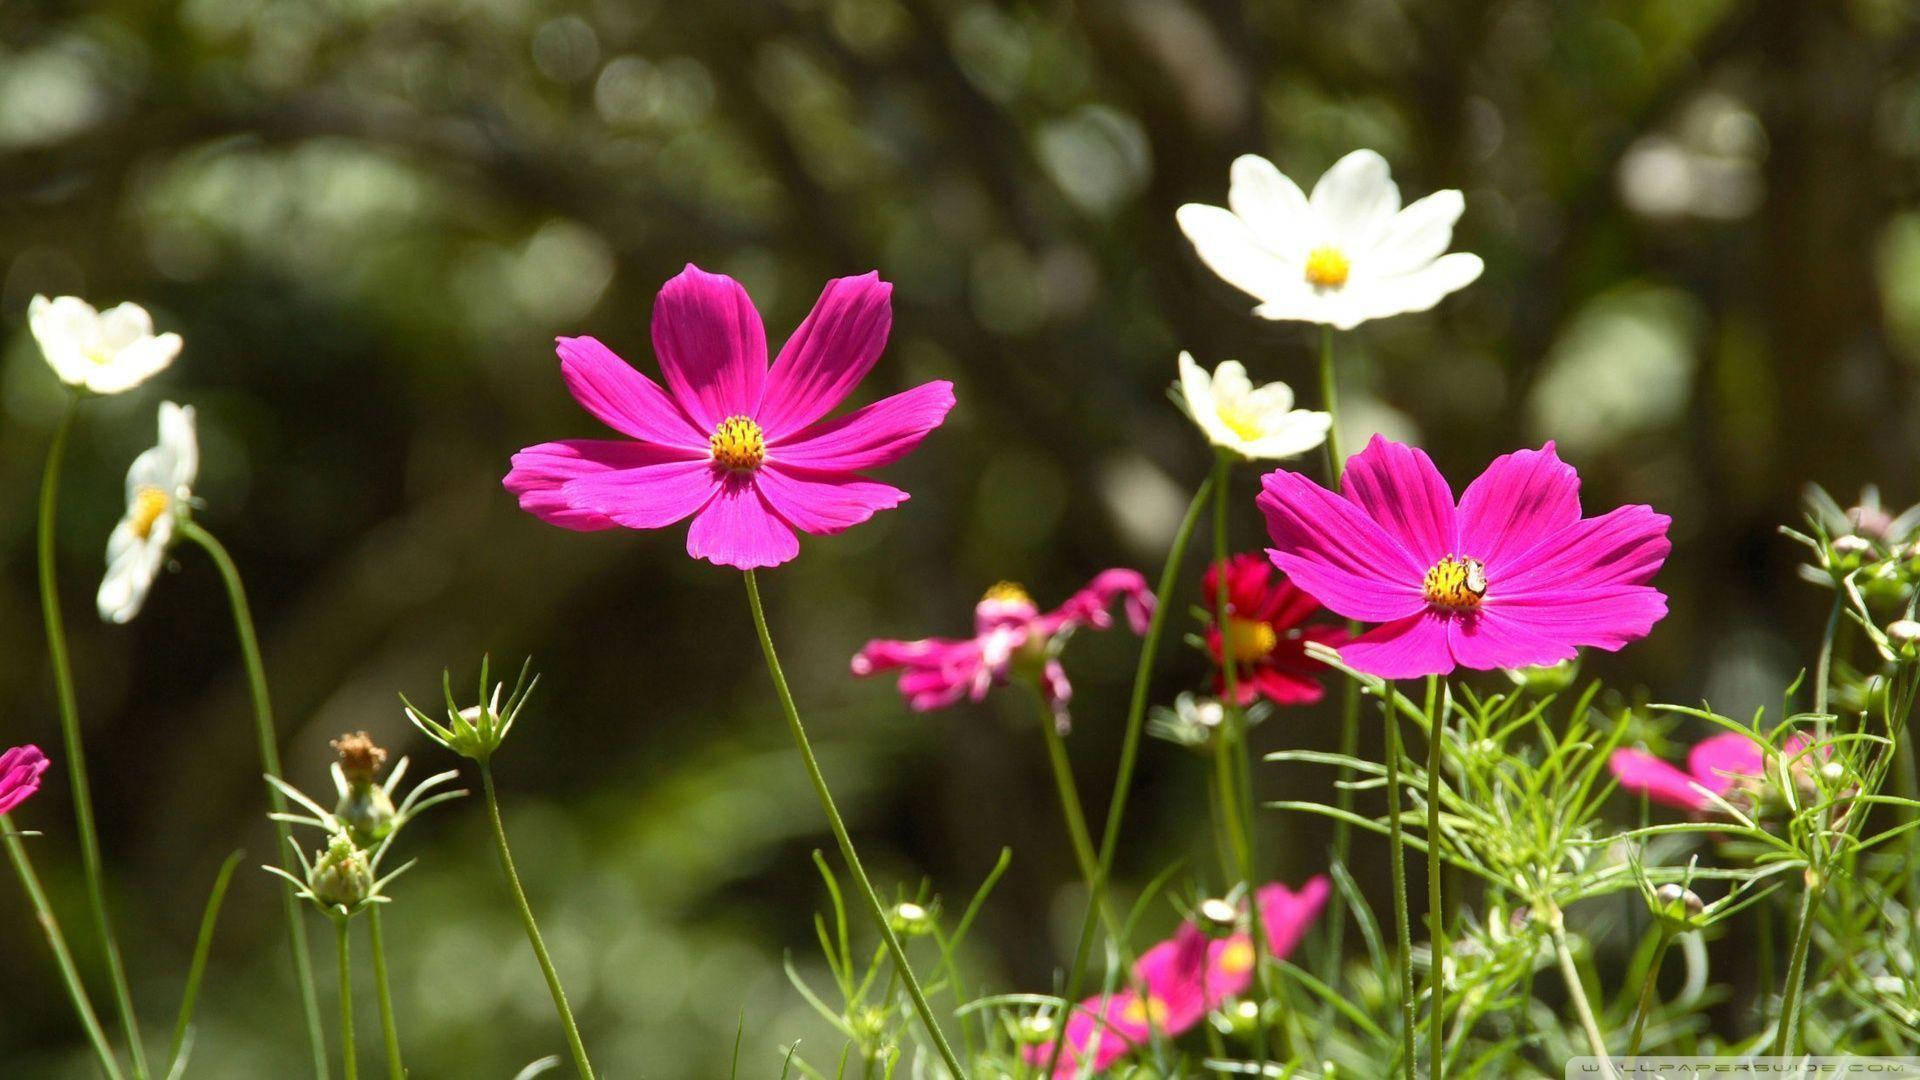 Flower Hd Pink And White Cosmos Background